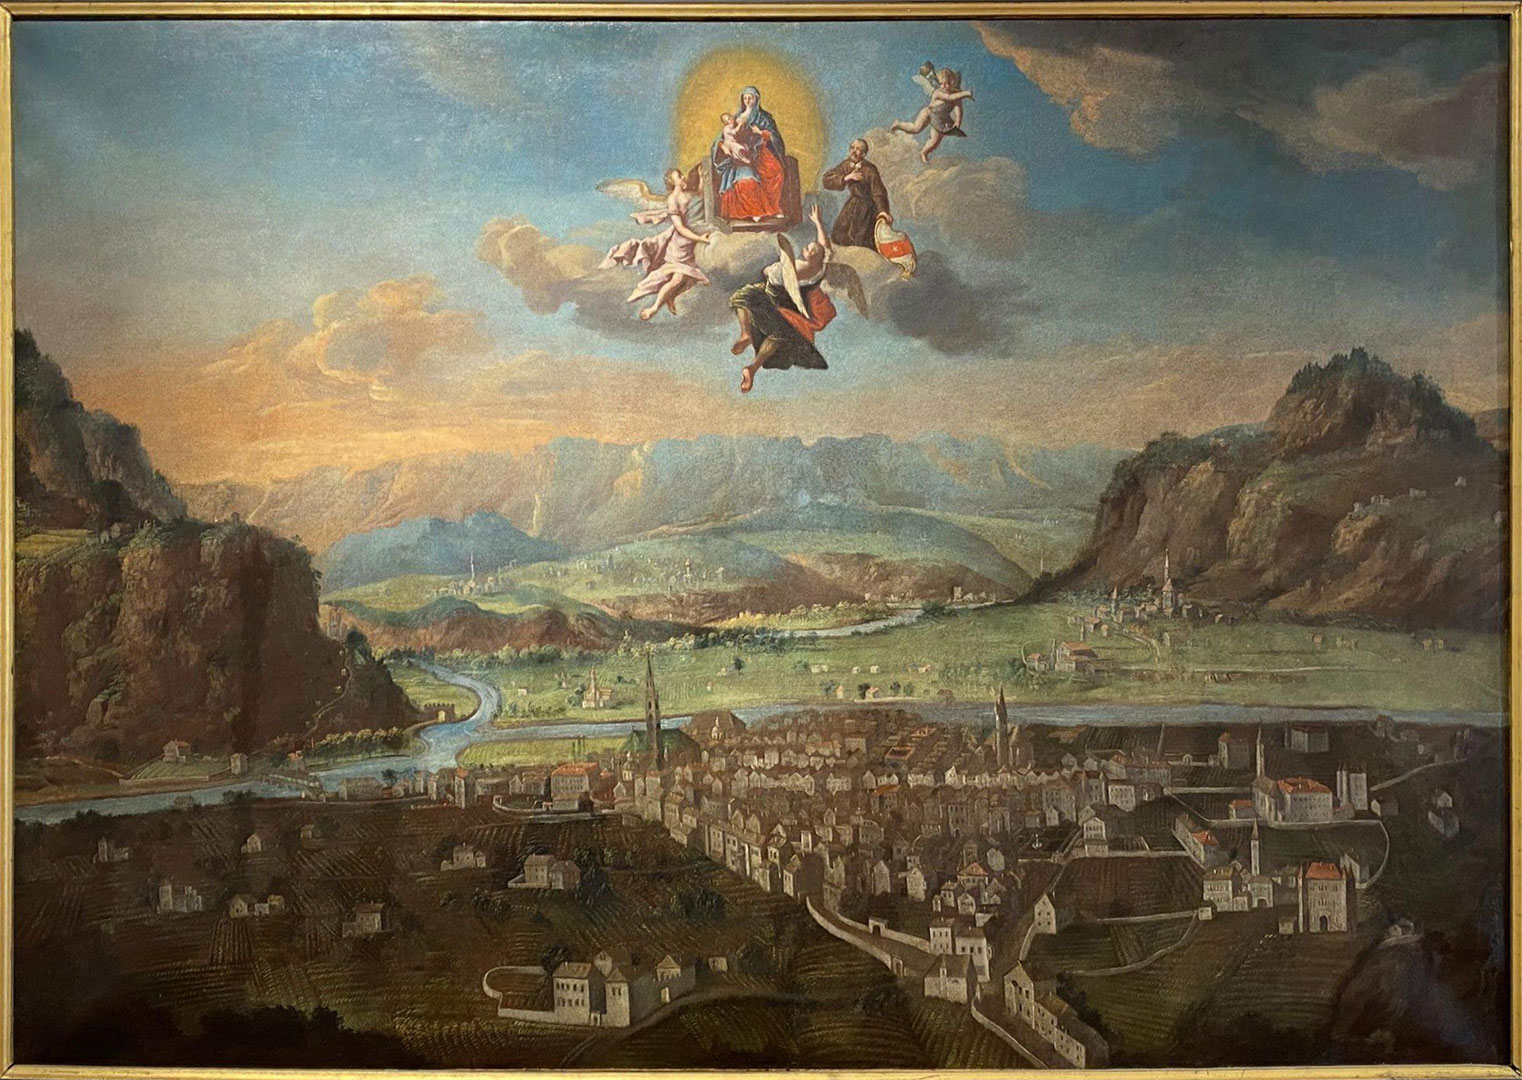 View of Bolzano with Blessed Henry in the Glorie by an unknown Bolzano Painter, after 1759, oil on canvas, 105x152cm, origin:unknown, city museum of Bolzano